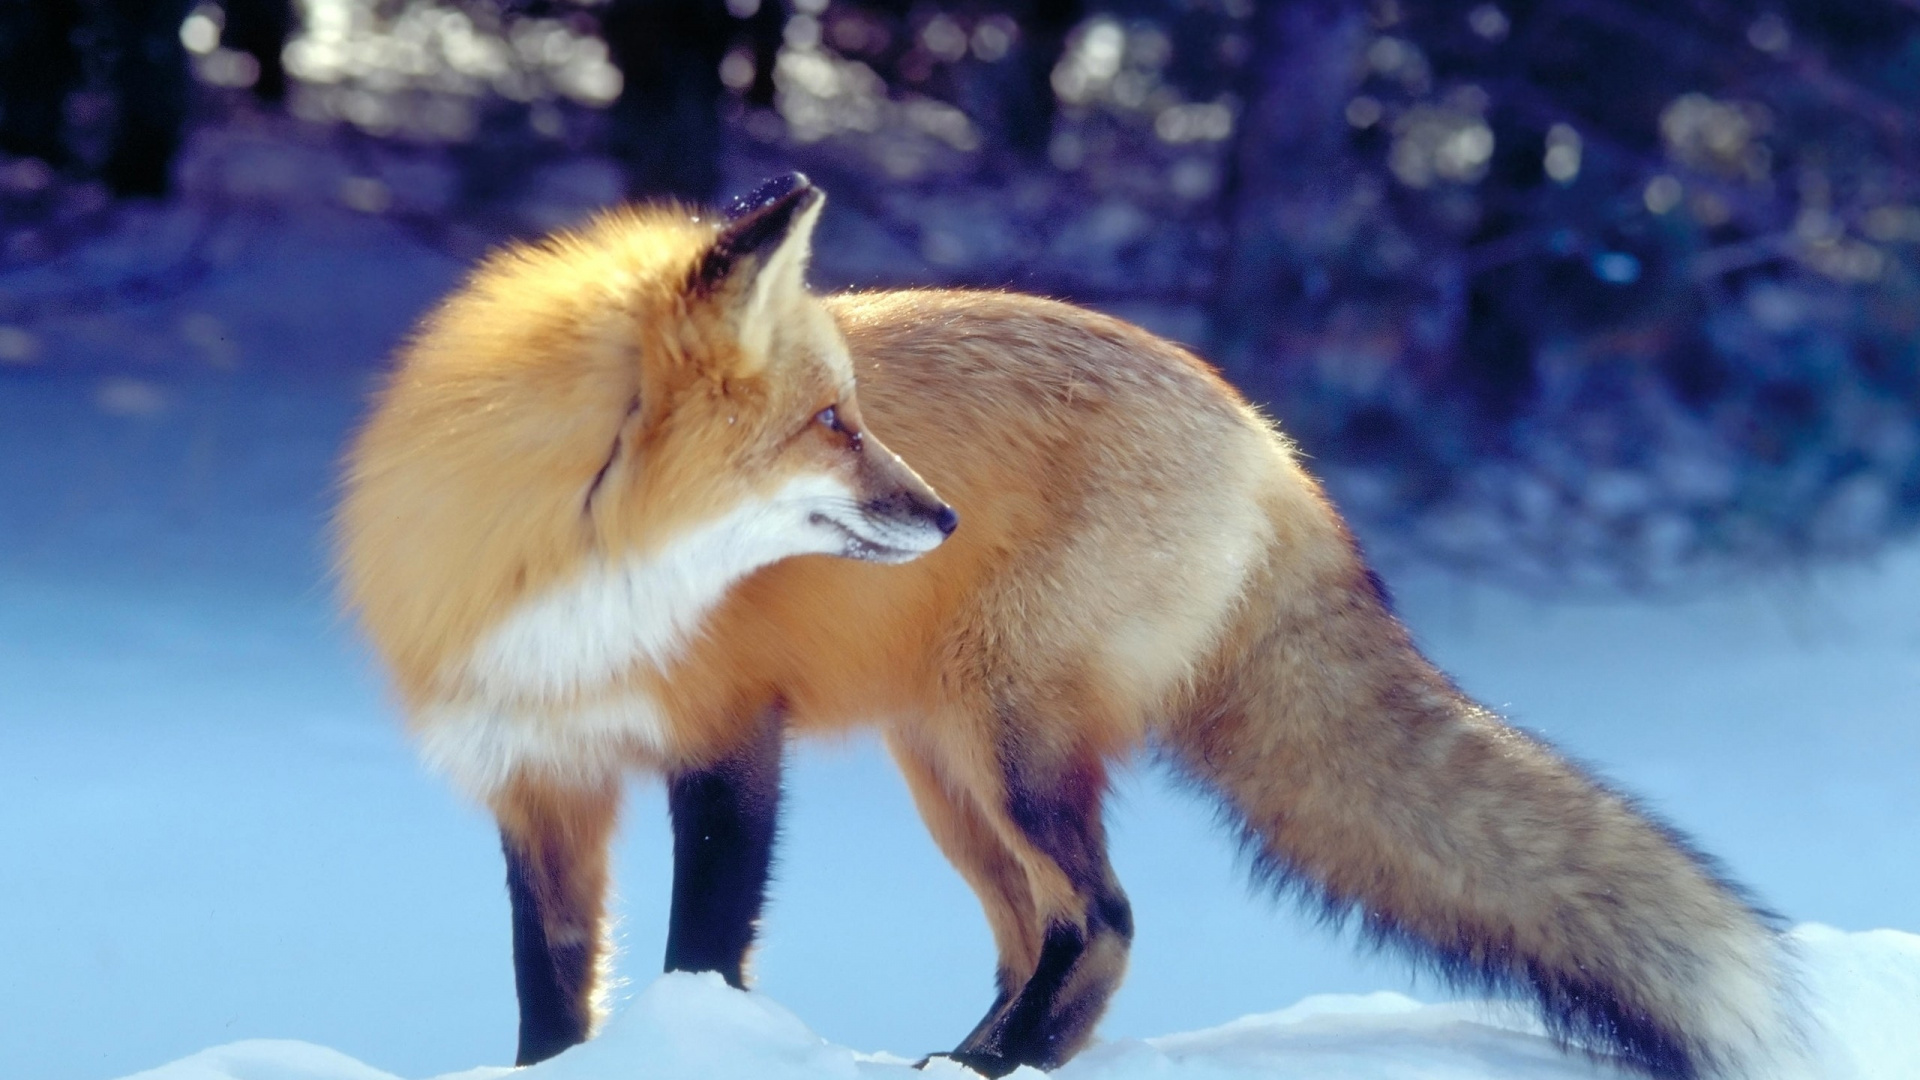 Brown Fox on Snow Covered Ground During Daytime. Wallpaper in 1920x1080 Resolution